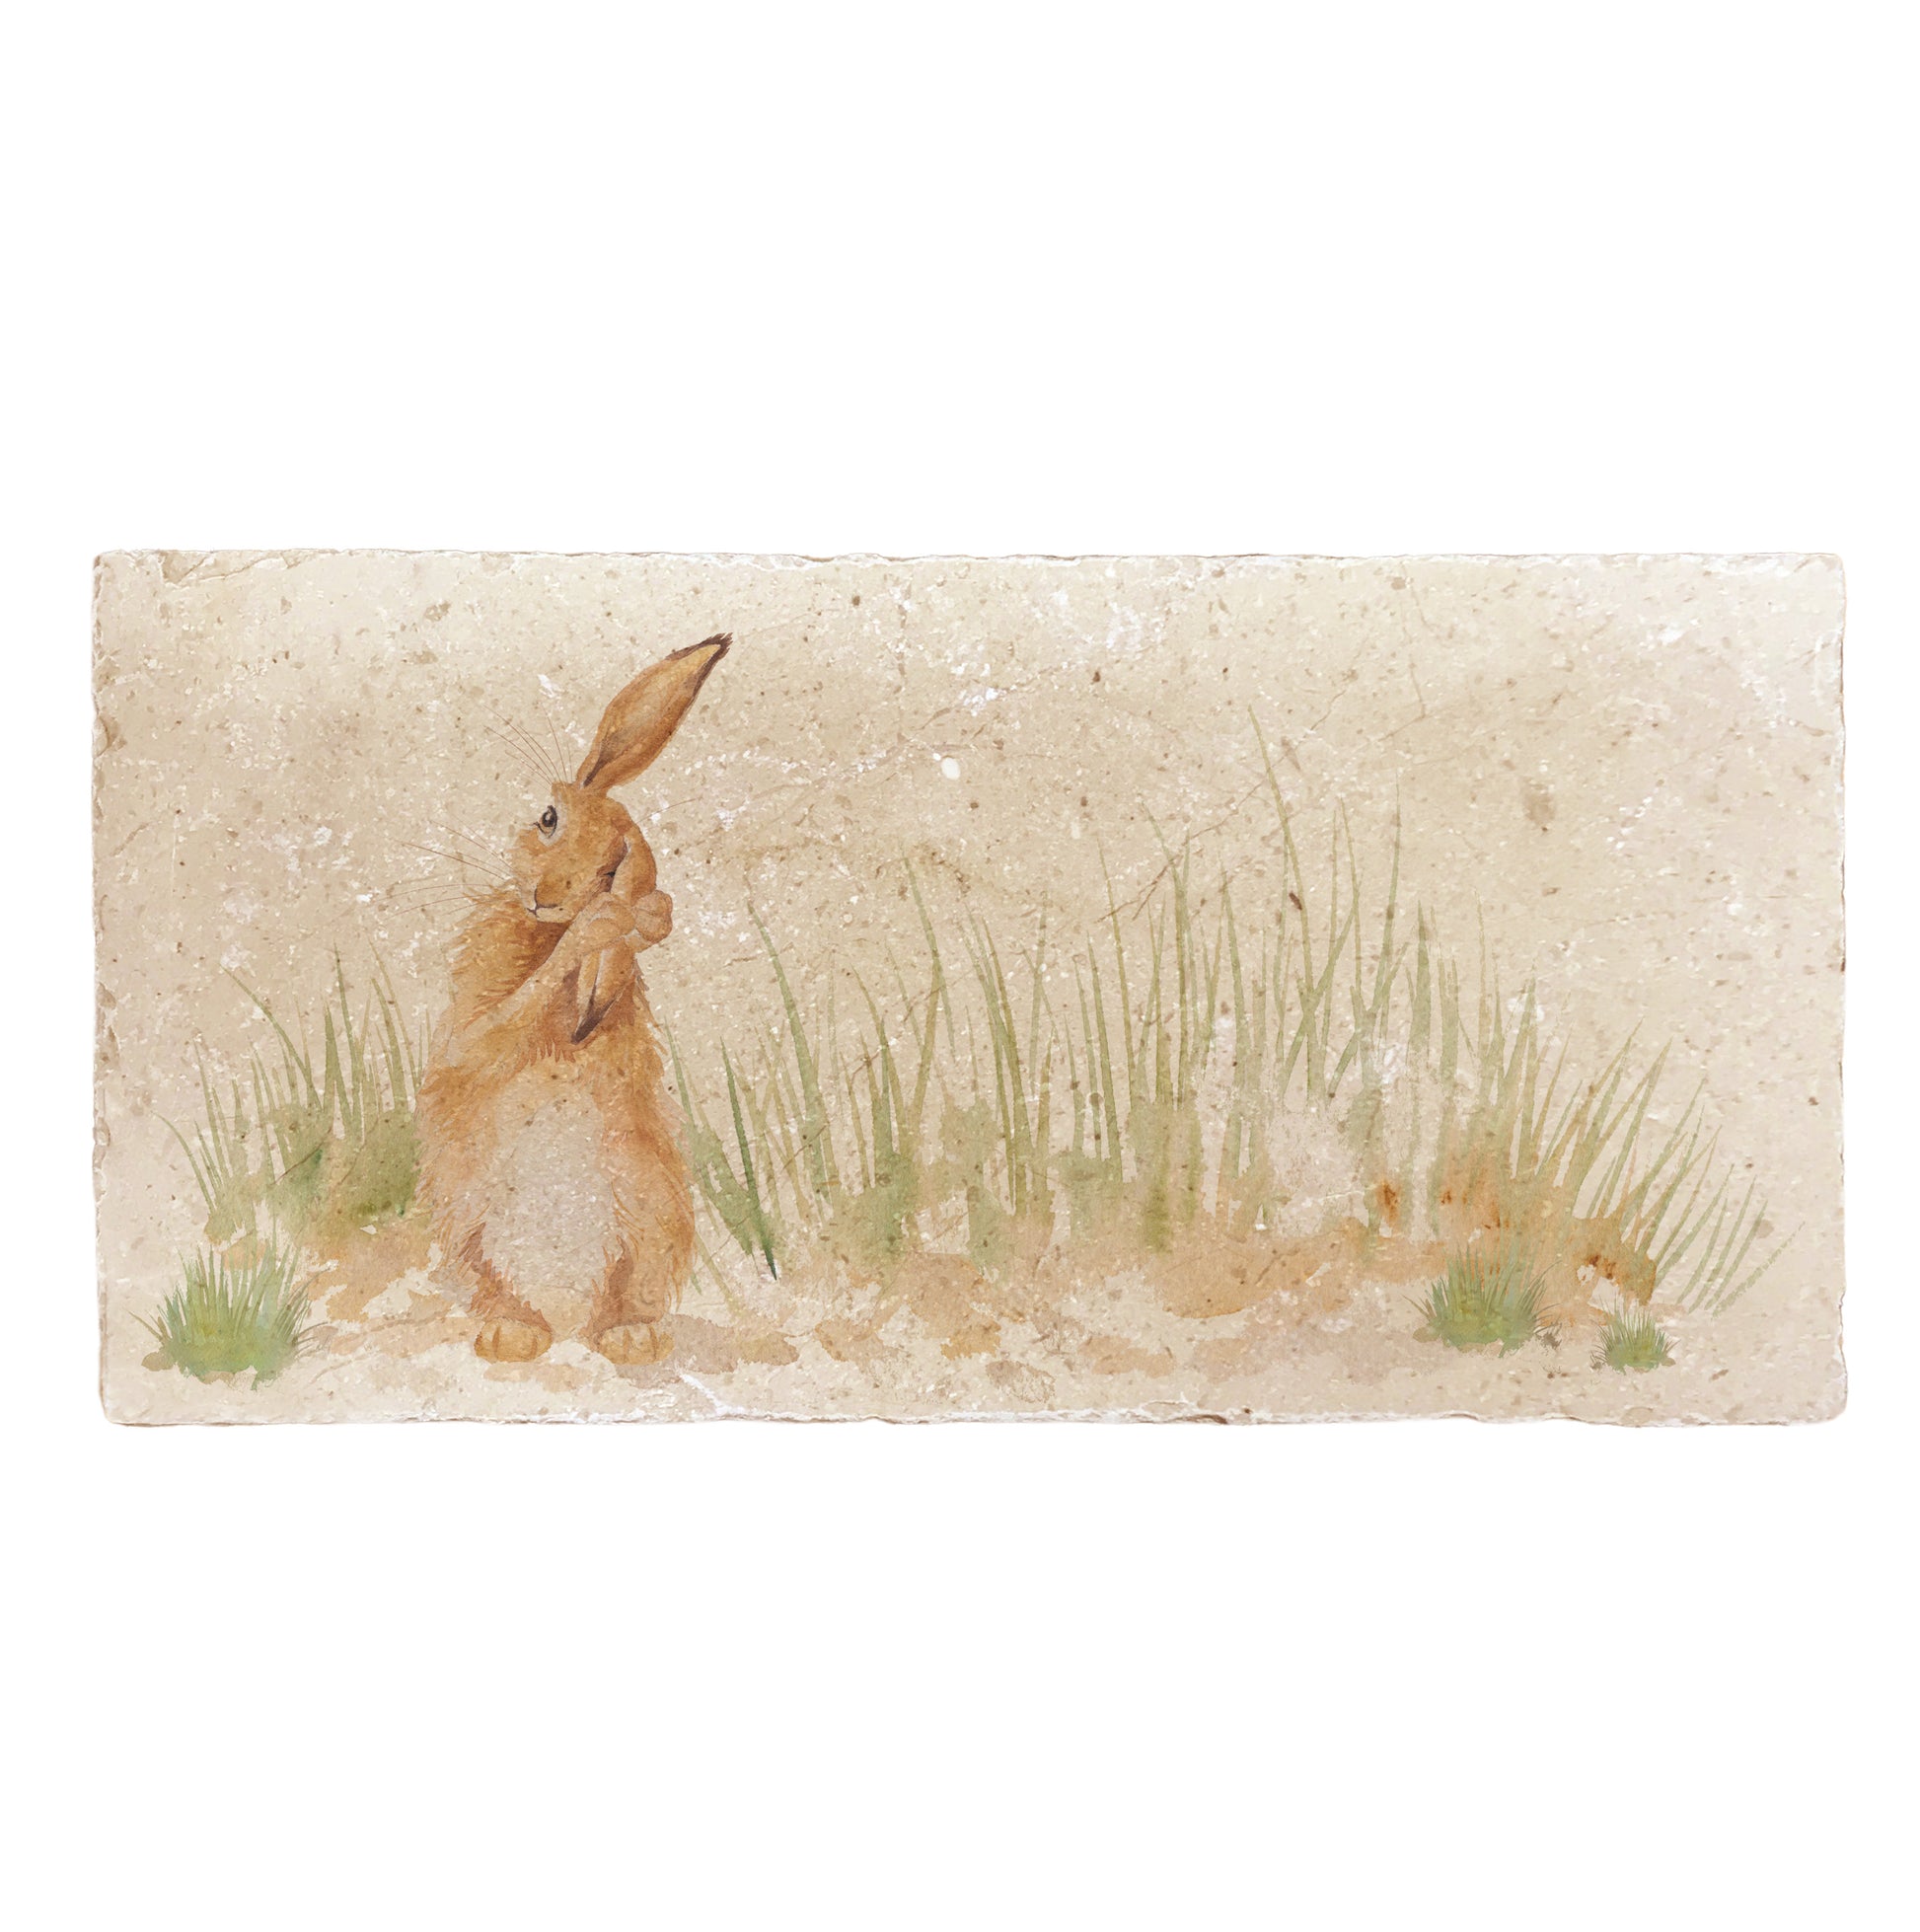 A handmade rectangle cream marble splashback tile featuring a watercolour countryside animal design of a hare in grass cleaning his ear.